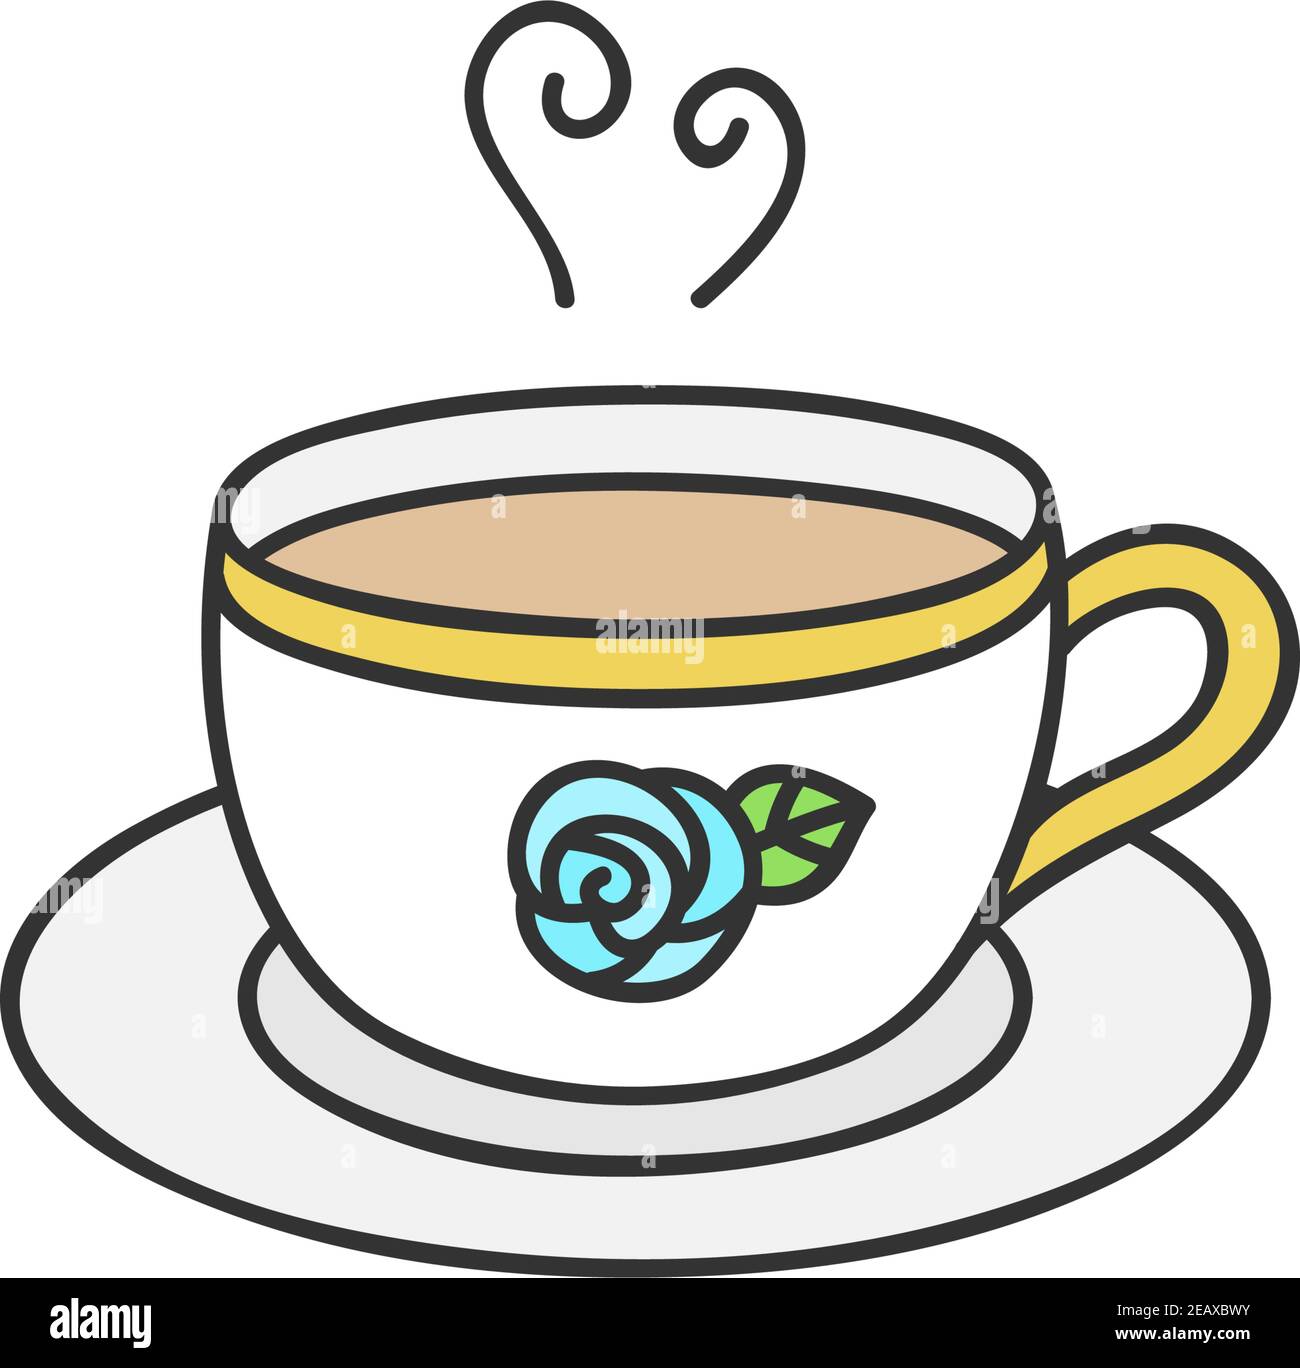 https://c8.alamy.com/comp/2EAXBWY/teacup-cute-vector-illustration-white-cup-of-tea-with-blue-rose-and-gold-details-hand-drawn-outlined-isolated-icon-sticker-2EAXBWY.jpg